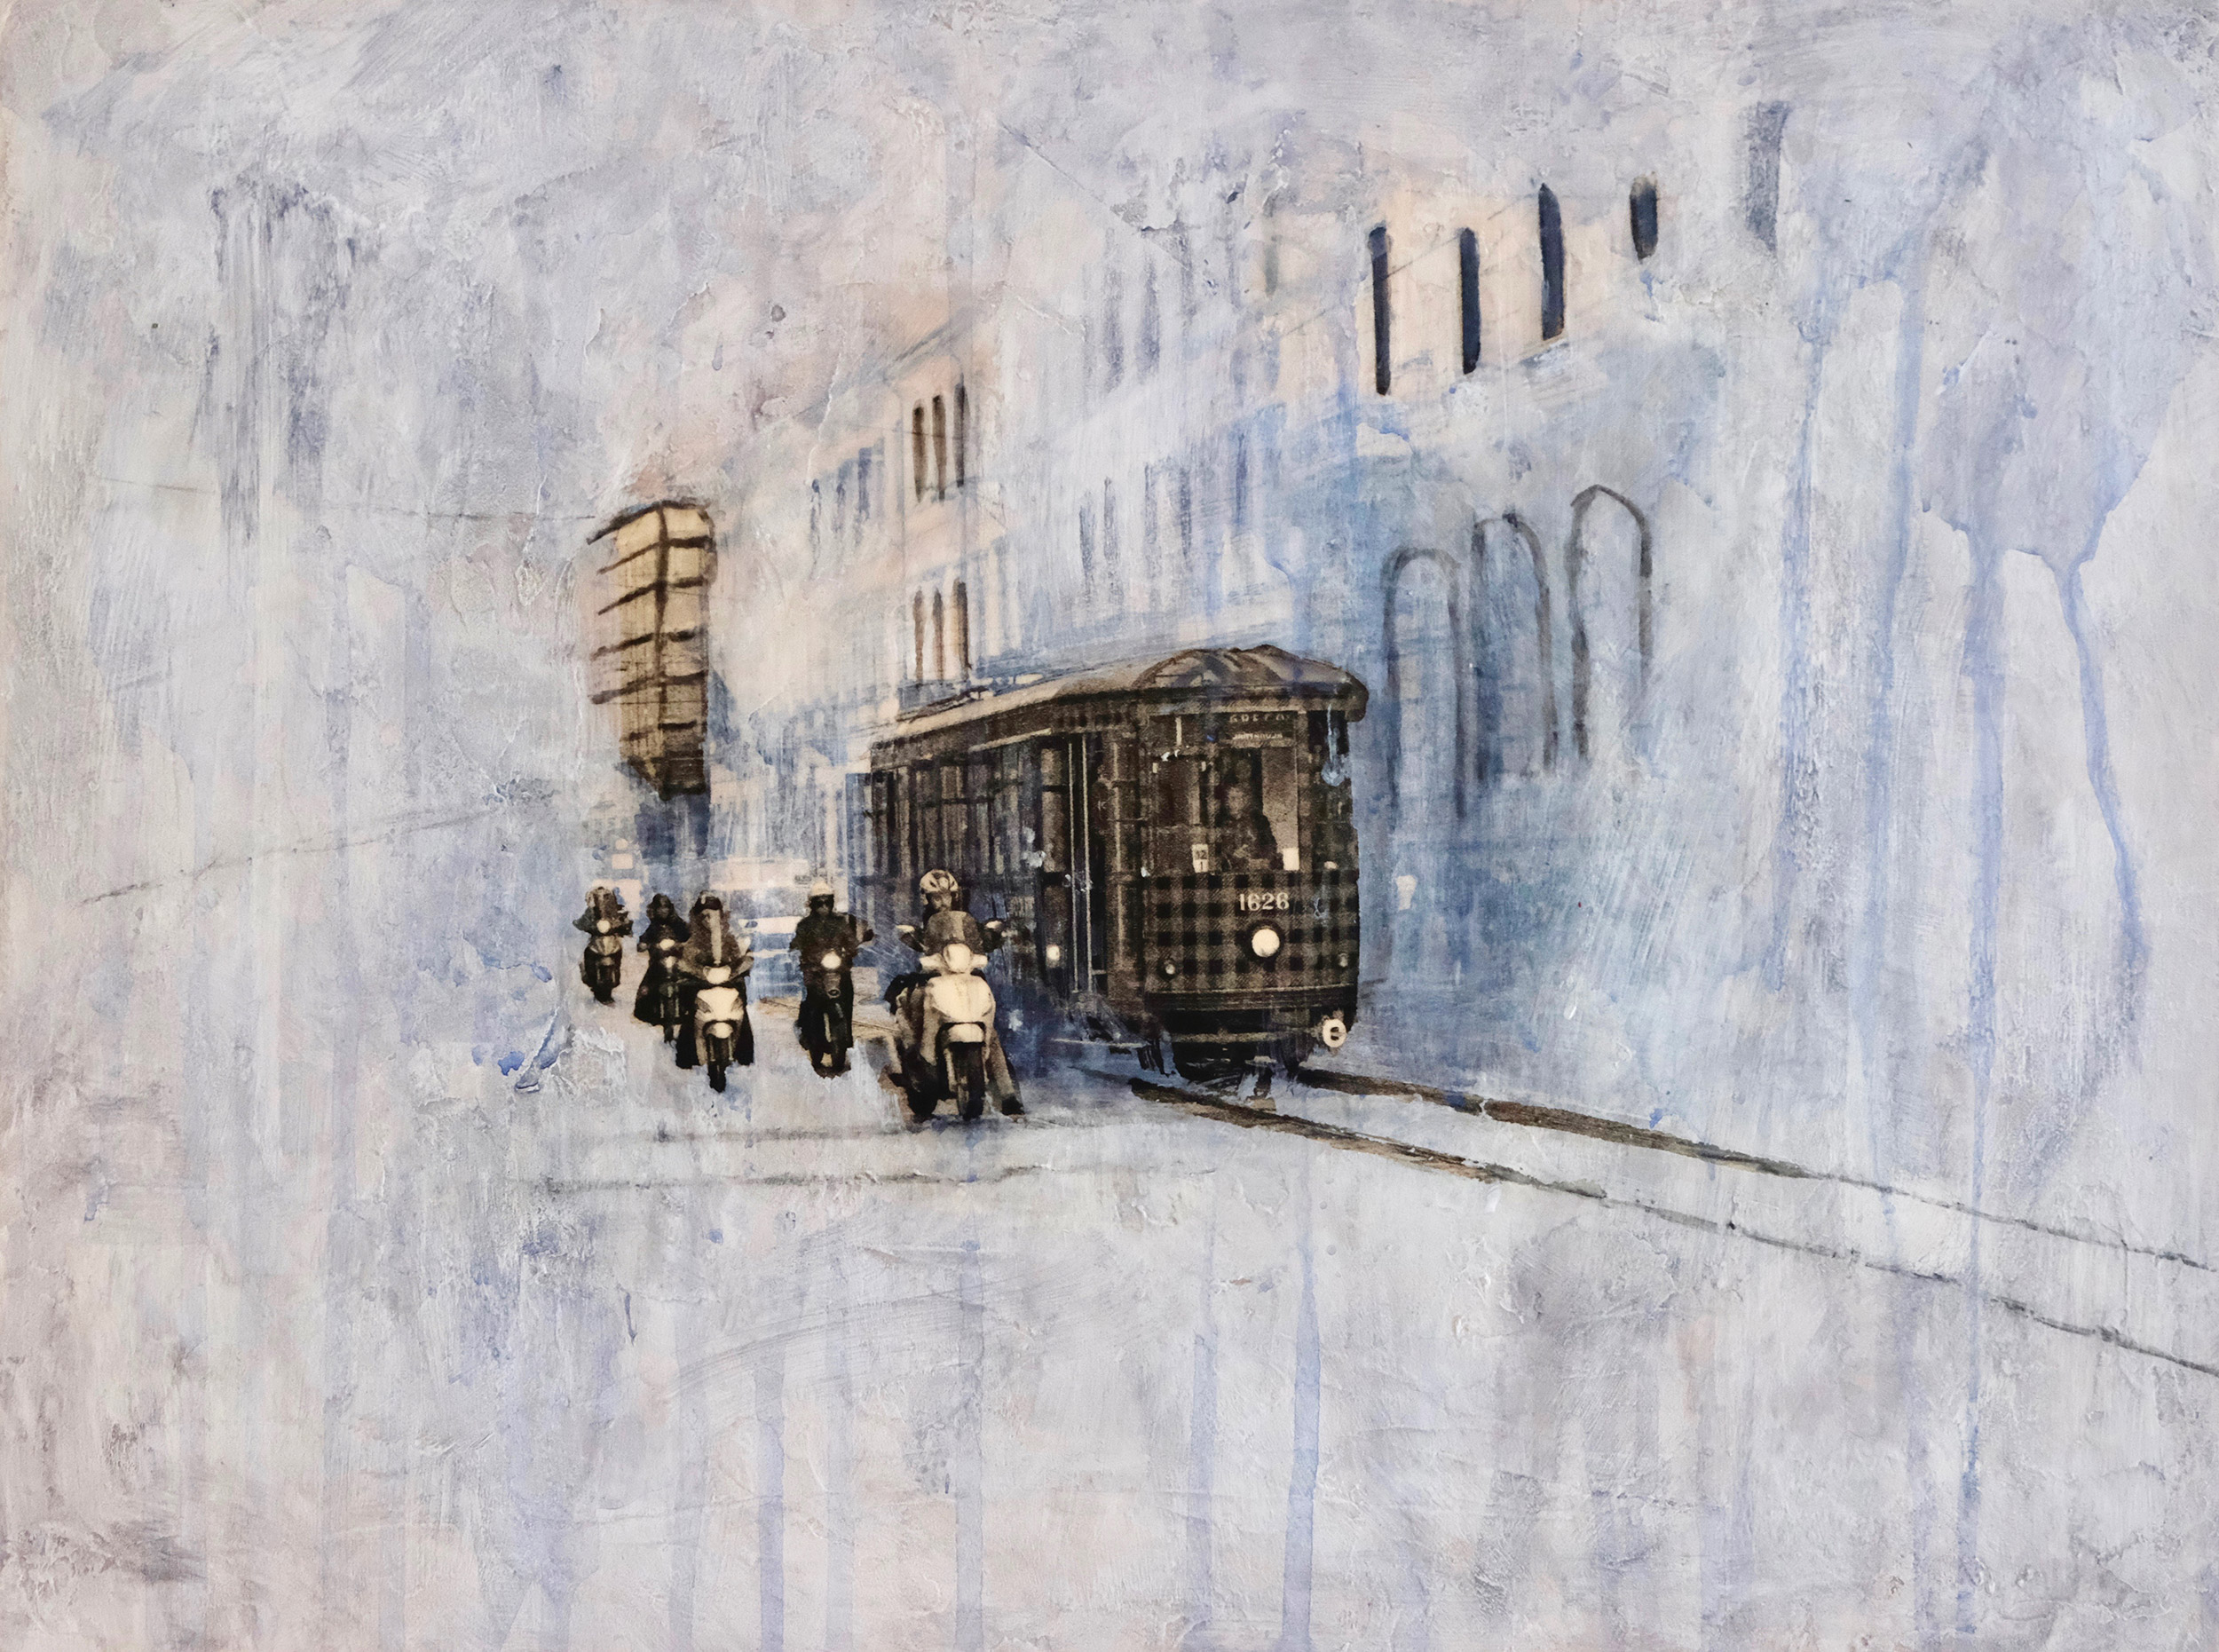   Milano II , 2019, photo transfer, acrylic and charcoal on cradled hardboard, 12x16 inches, SOLD 